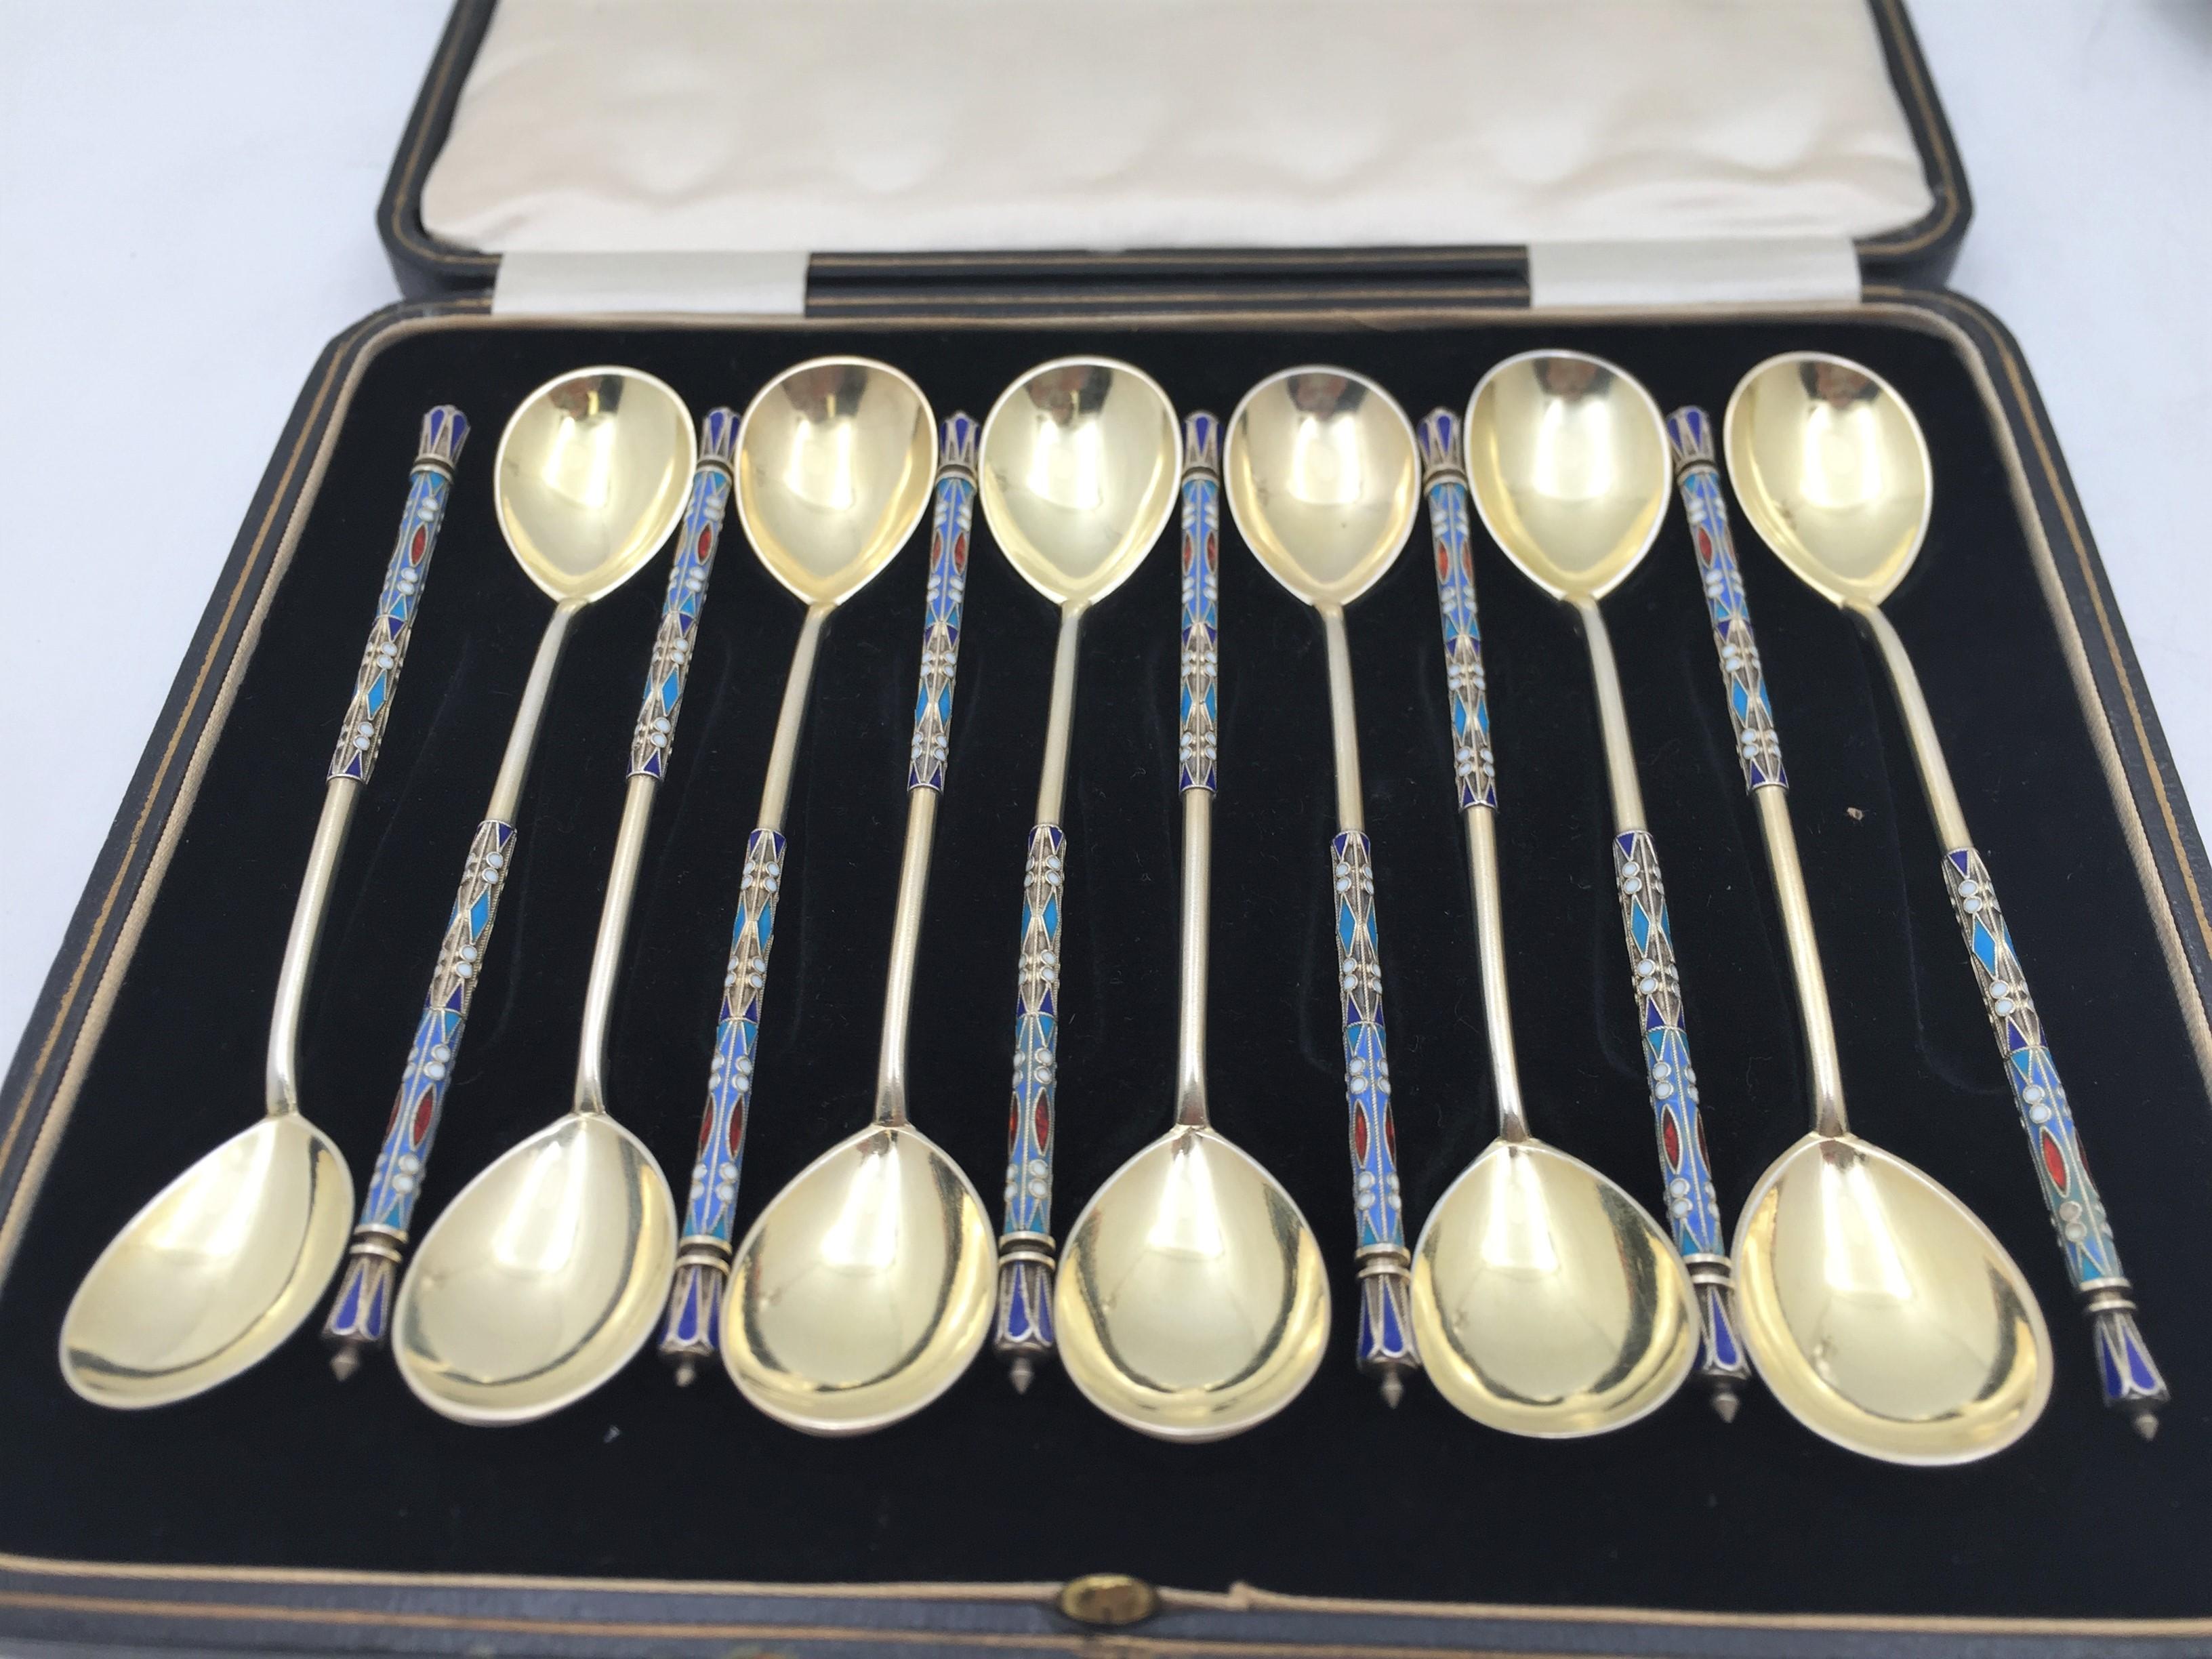 Ivan Saltykov, set of 12 Russian 0.910 gilt silver and enamel spoons in Faberge style from the late 19th or early 20th century, measuring 5 1/2'' in length by 1'' in width and bearing hallmarks as shown. This set is sold in the box which is shown.